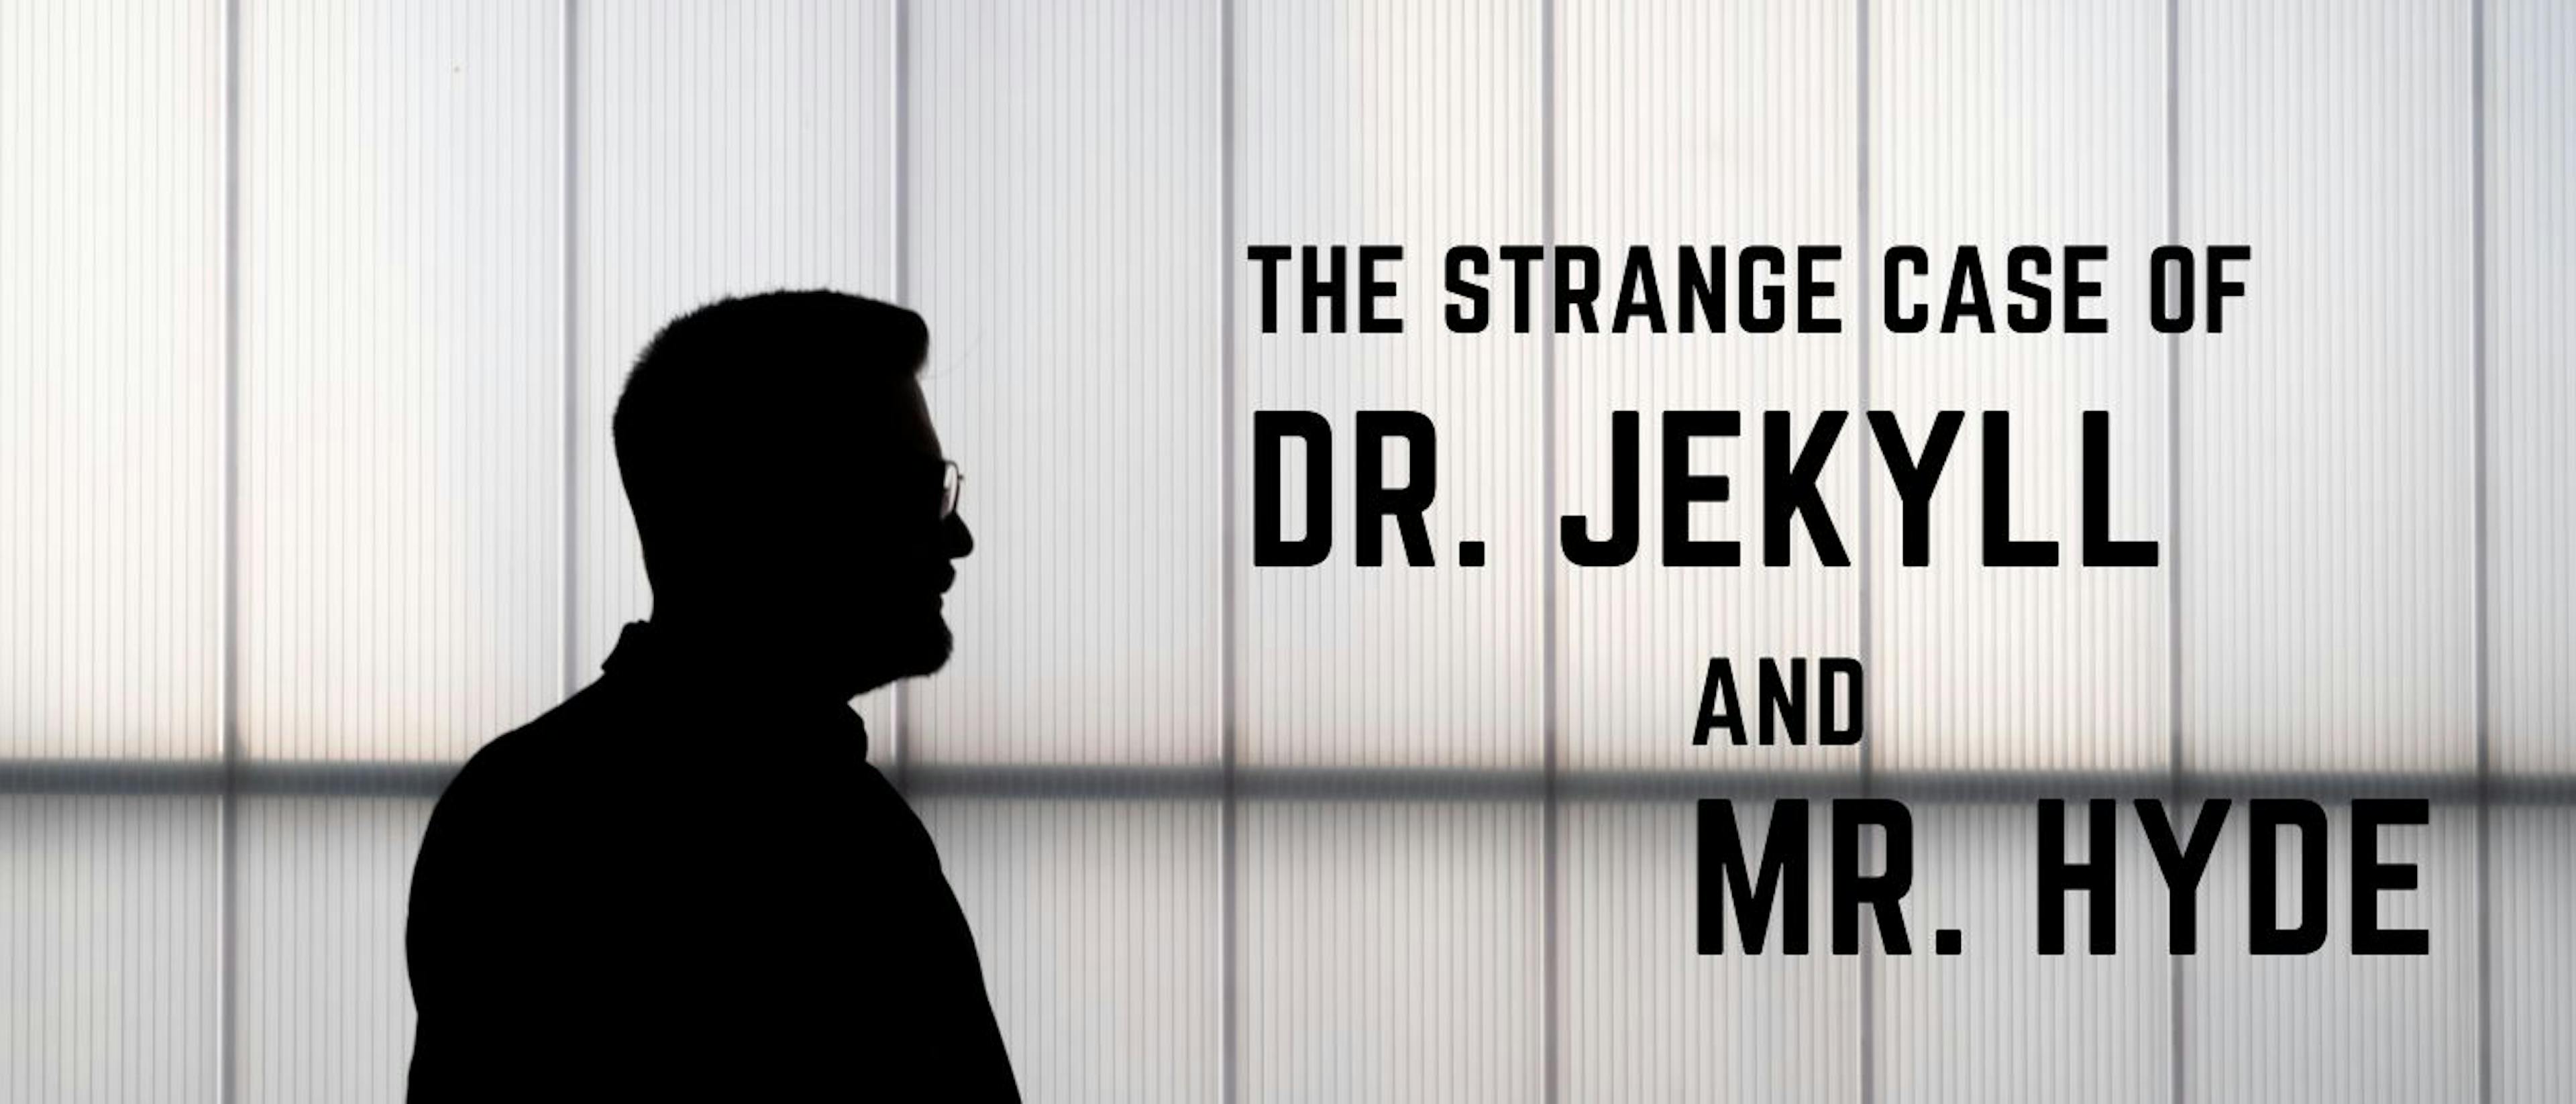 featured image - The Strange Case Of Dr. Jekyll And Mr. Hyde: Chapter IV - The Carew murder case 